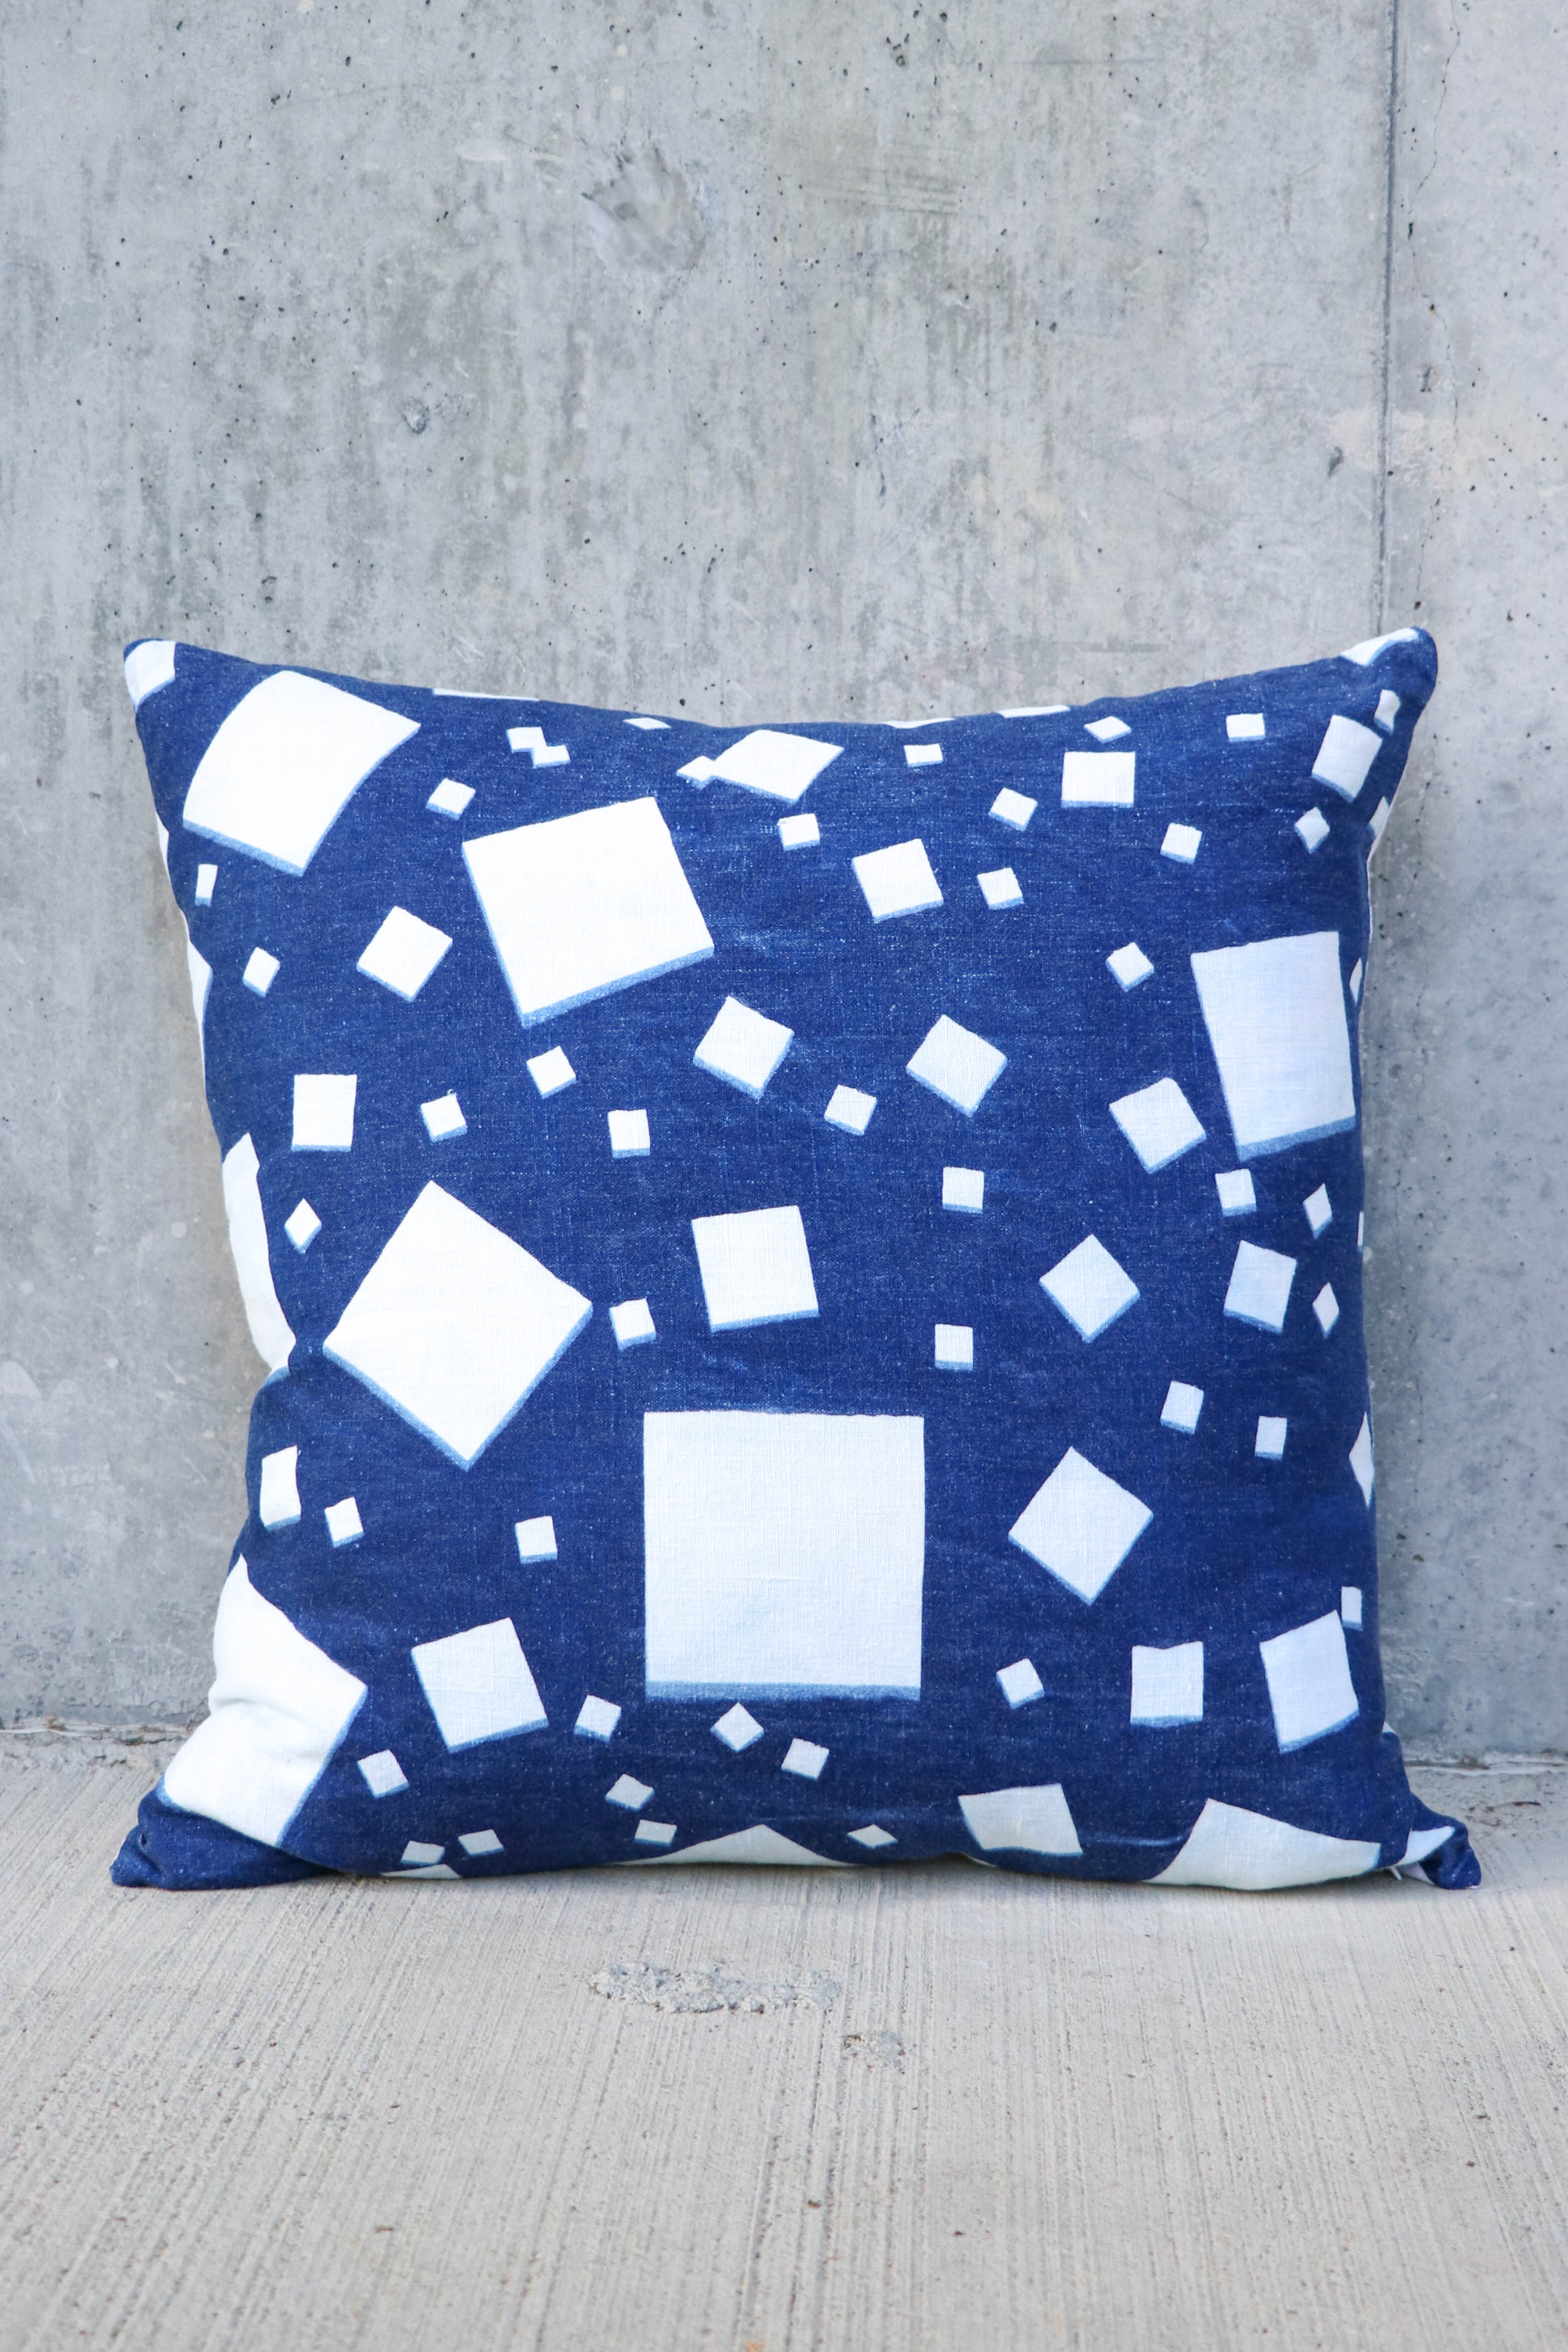 Shop the Cyanotype Collection